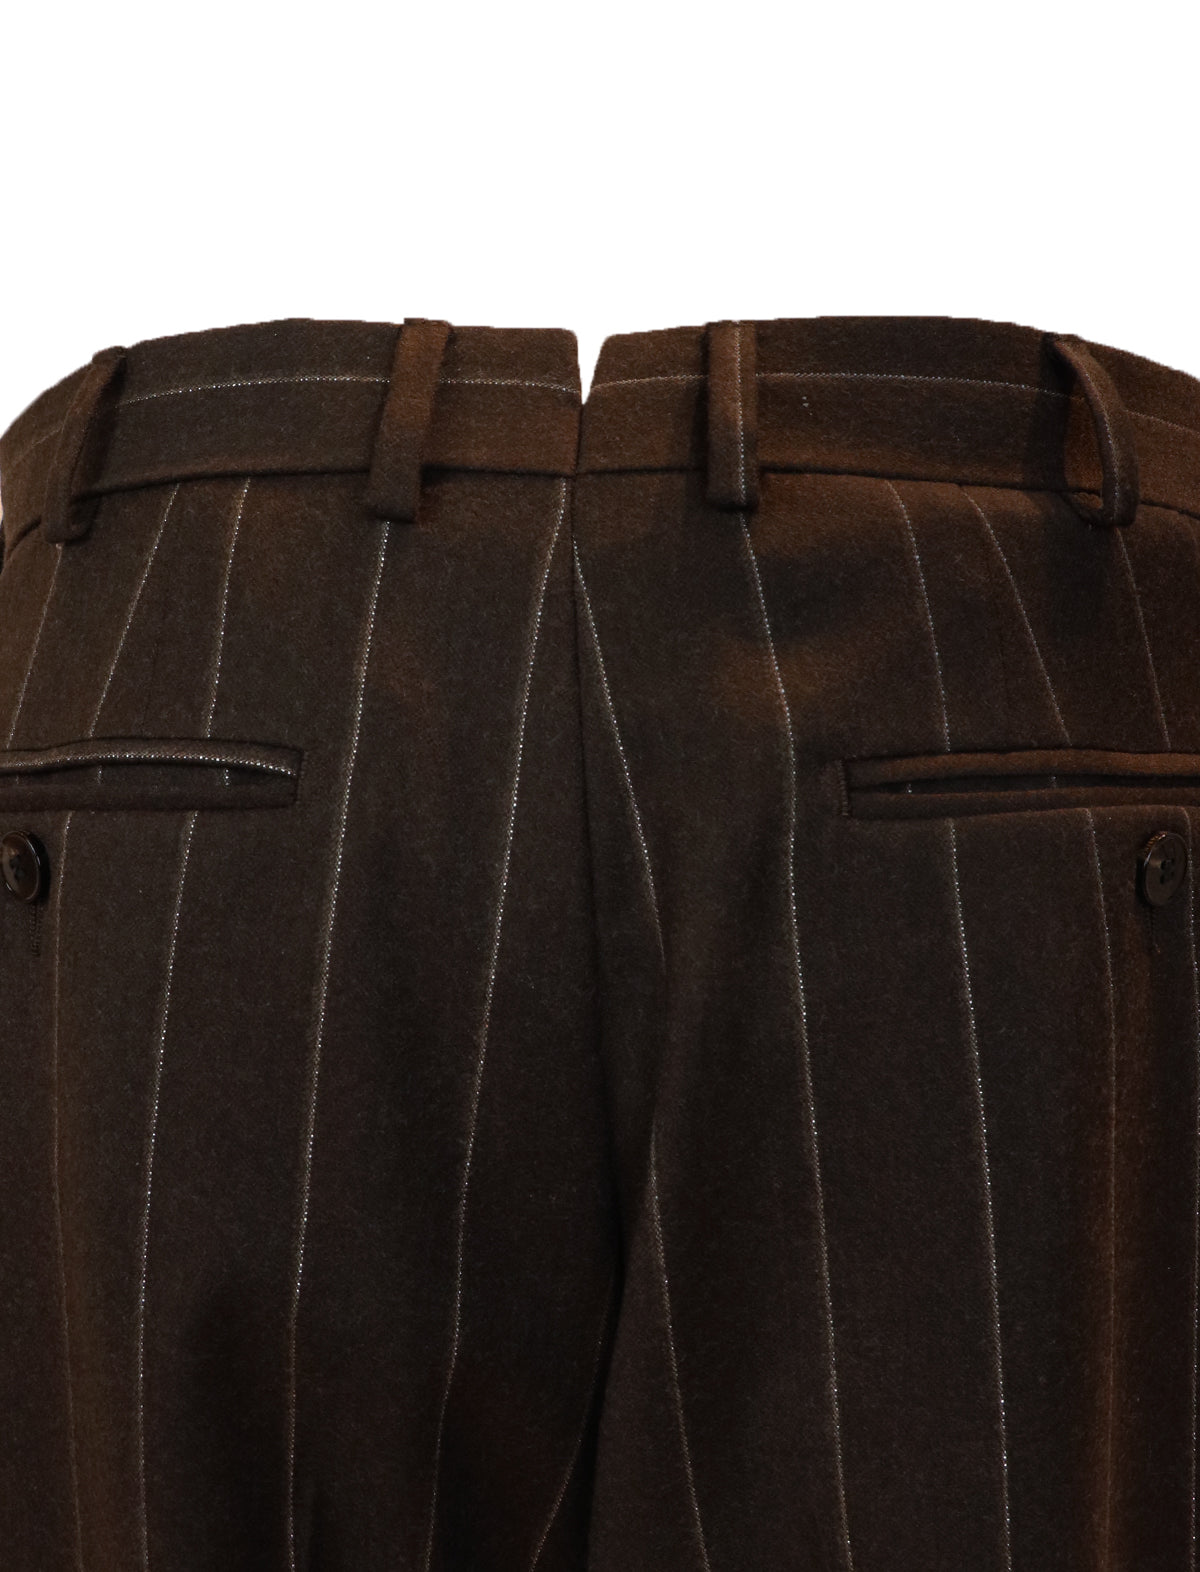 GABRIELE PASINI Tailored Pant in Brown & Silver Stripes